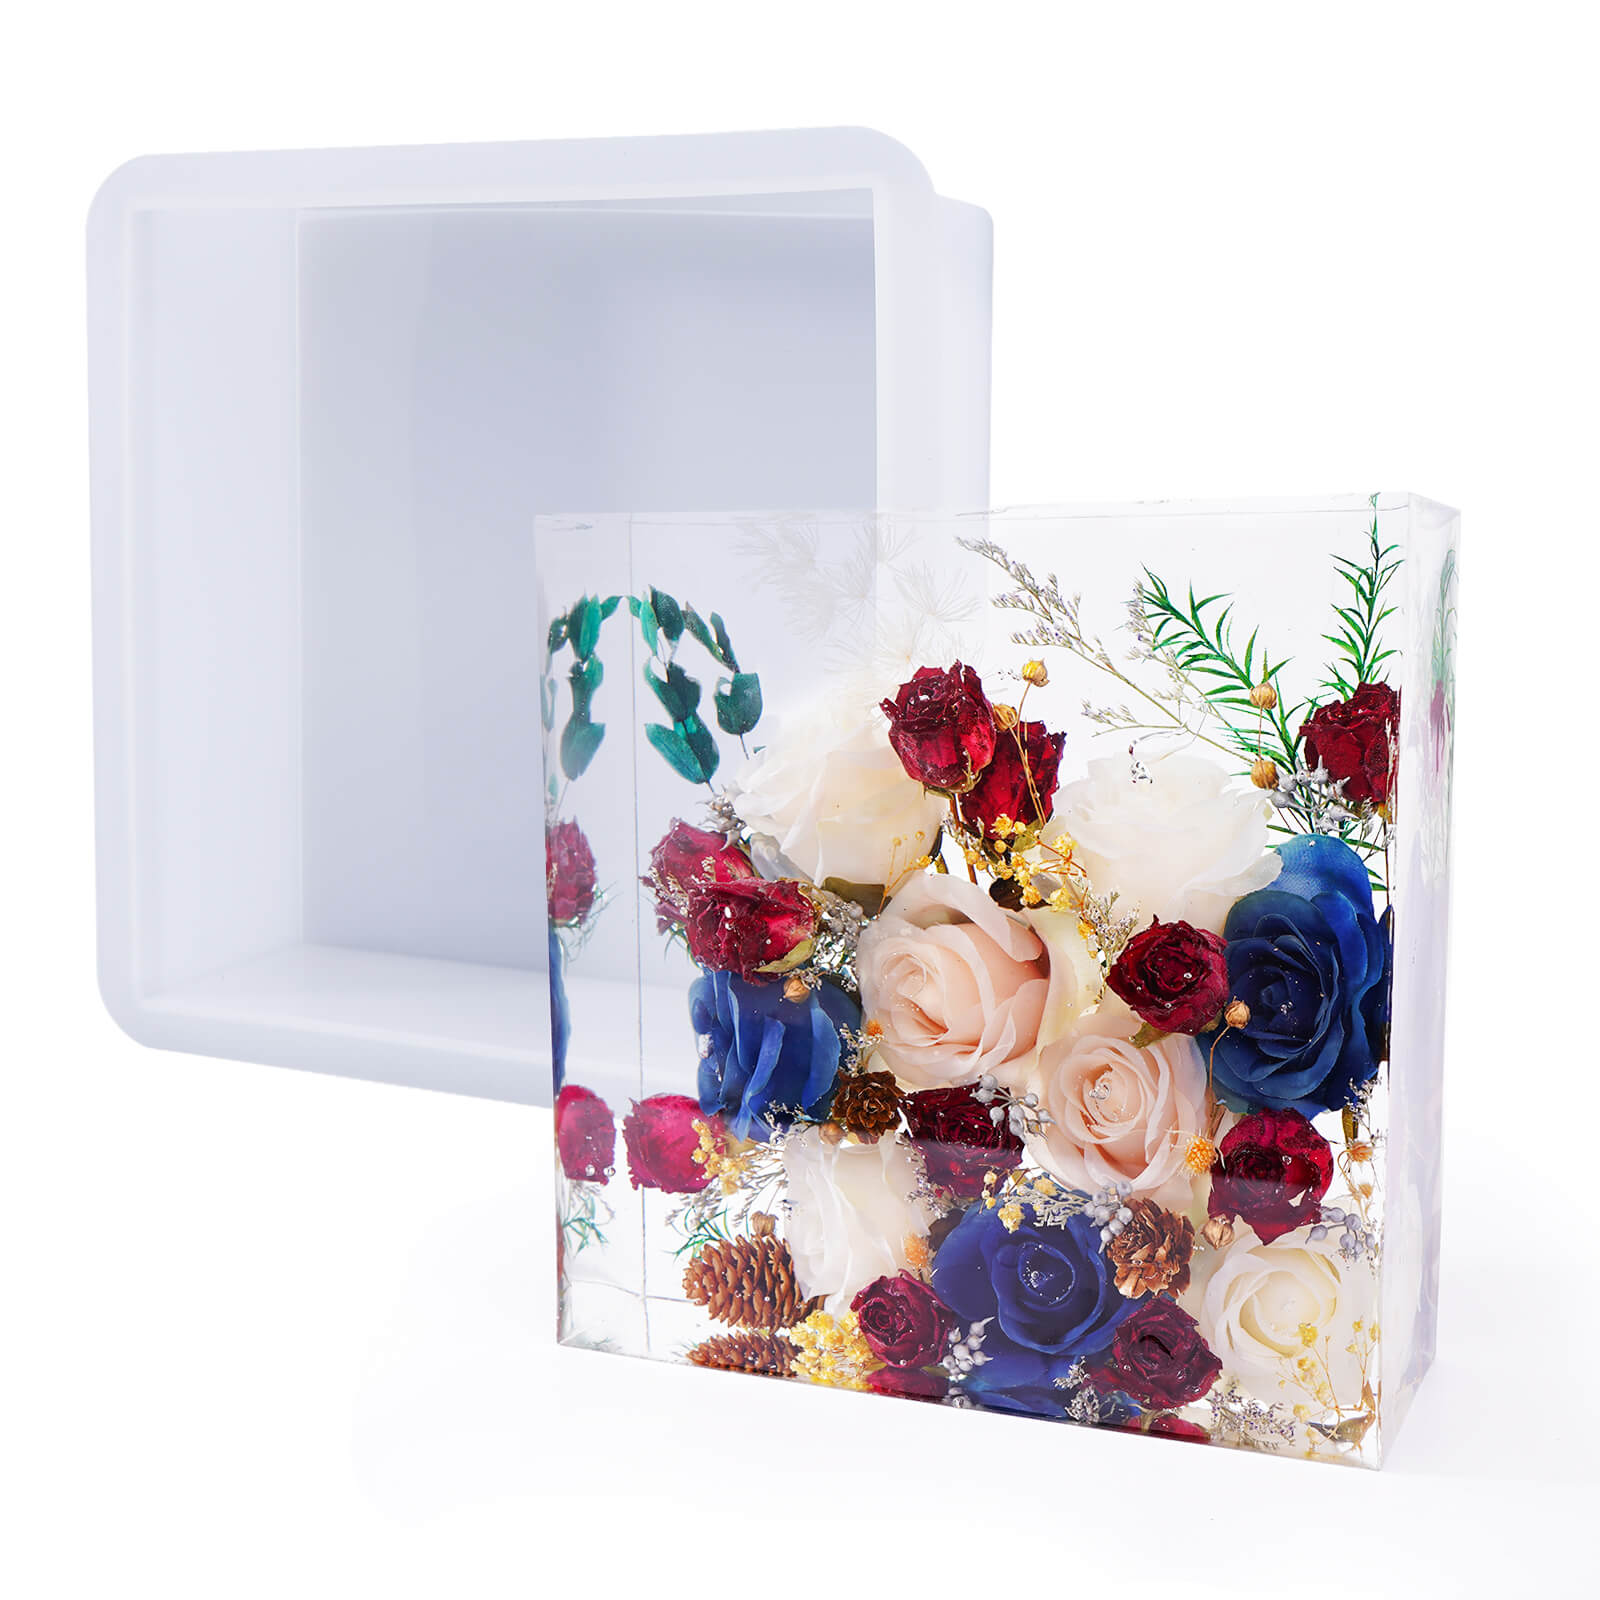 Let's Resin How to Get a Decorative Flower Mirror with UV Resin